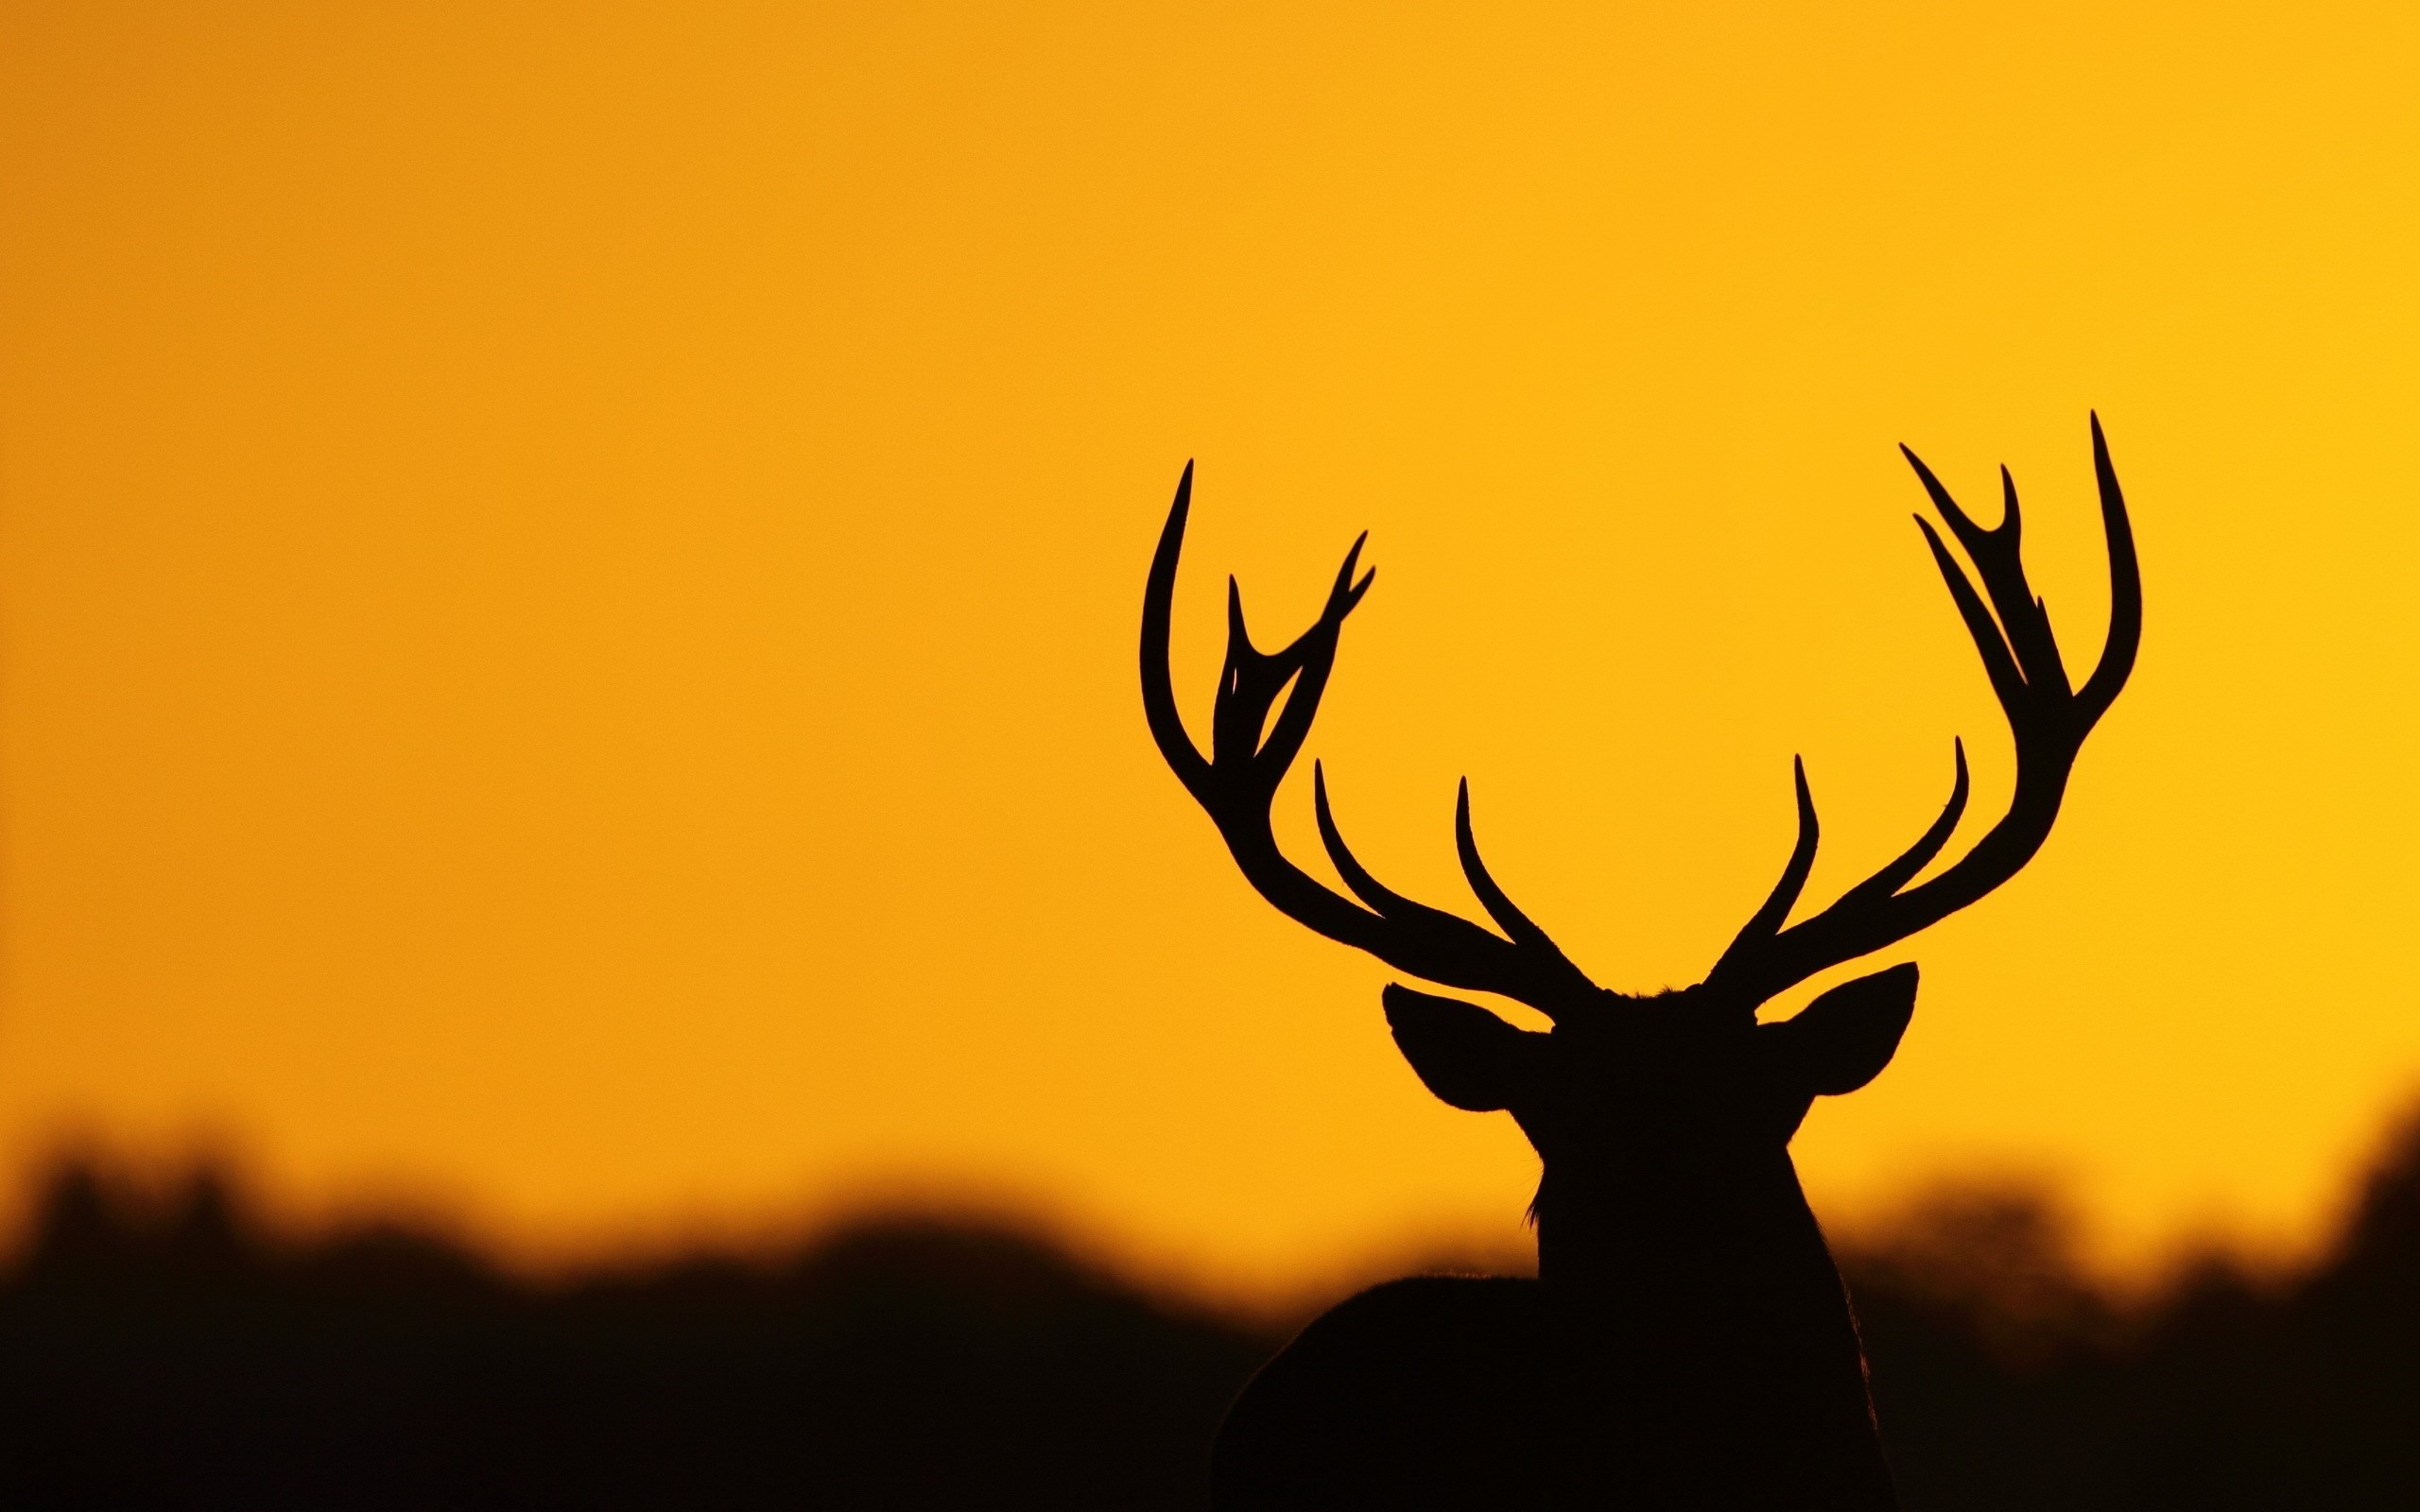 Deer Wallpapers Android Apps on Google Play